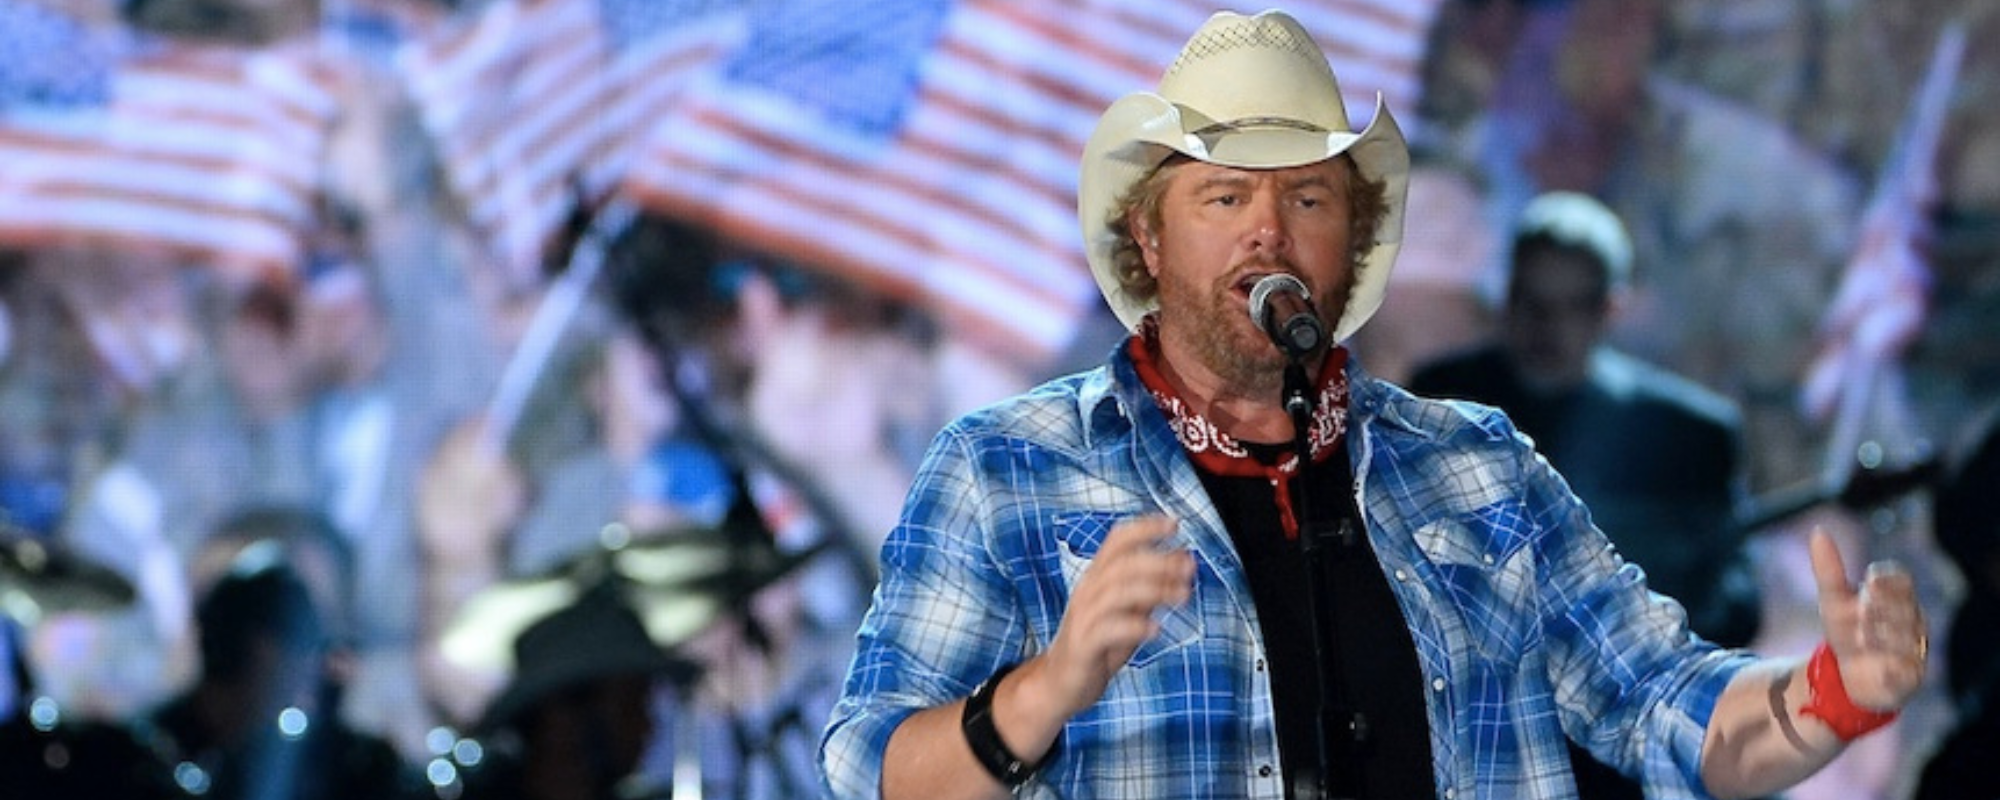 Country's Toby Keith will be singing for the soldiers